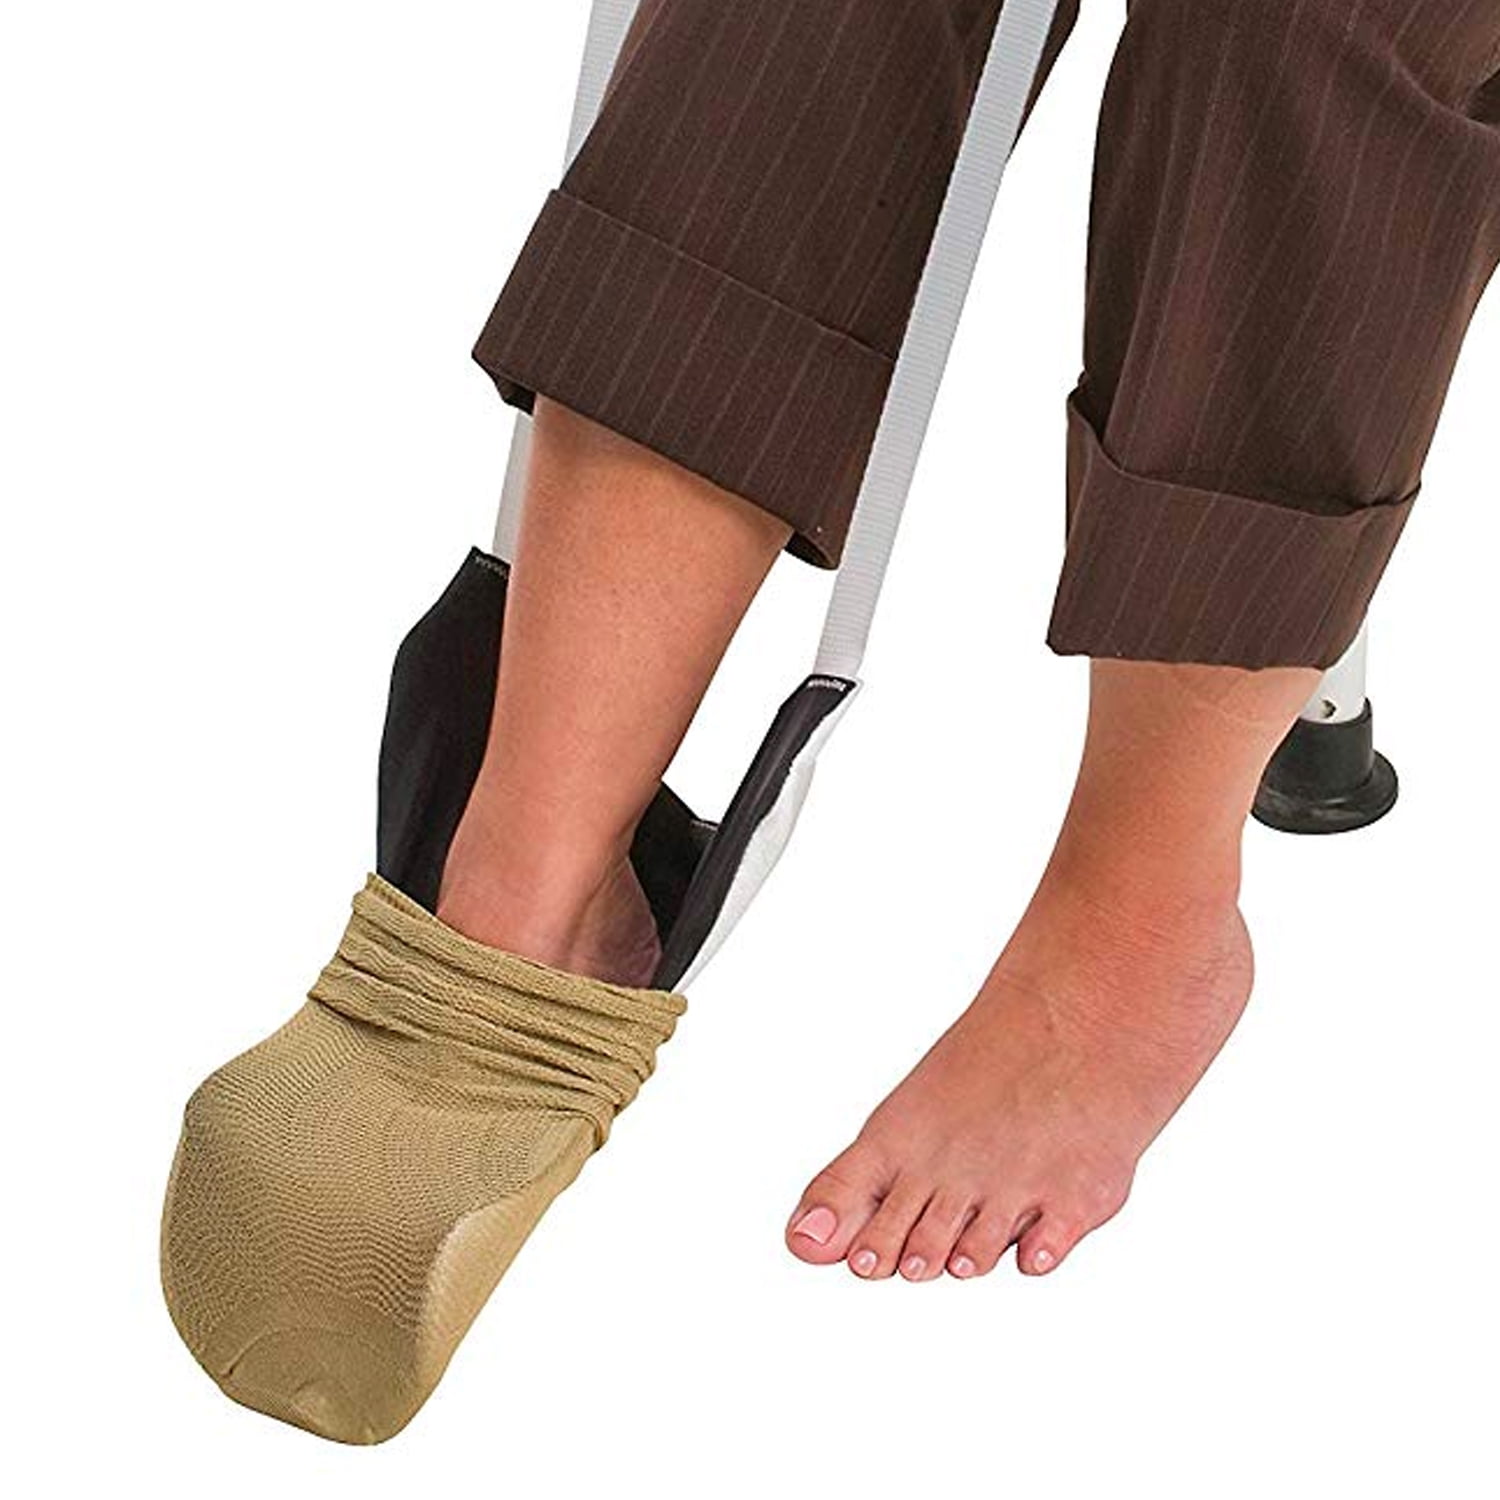 Sock Aid for Help Putting On Socks, Compression Sock Assistance Device